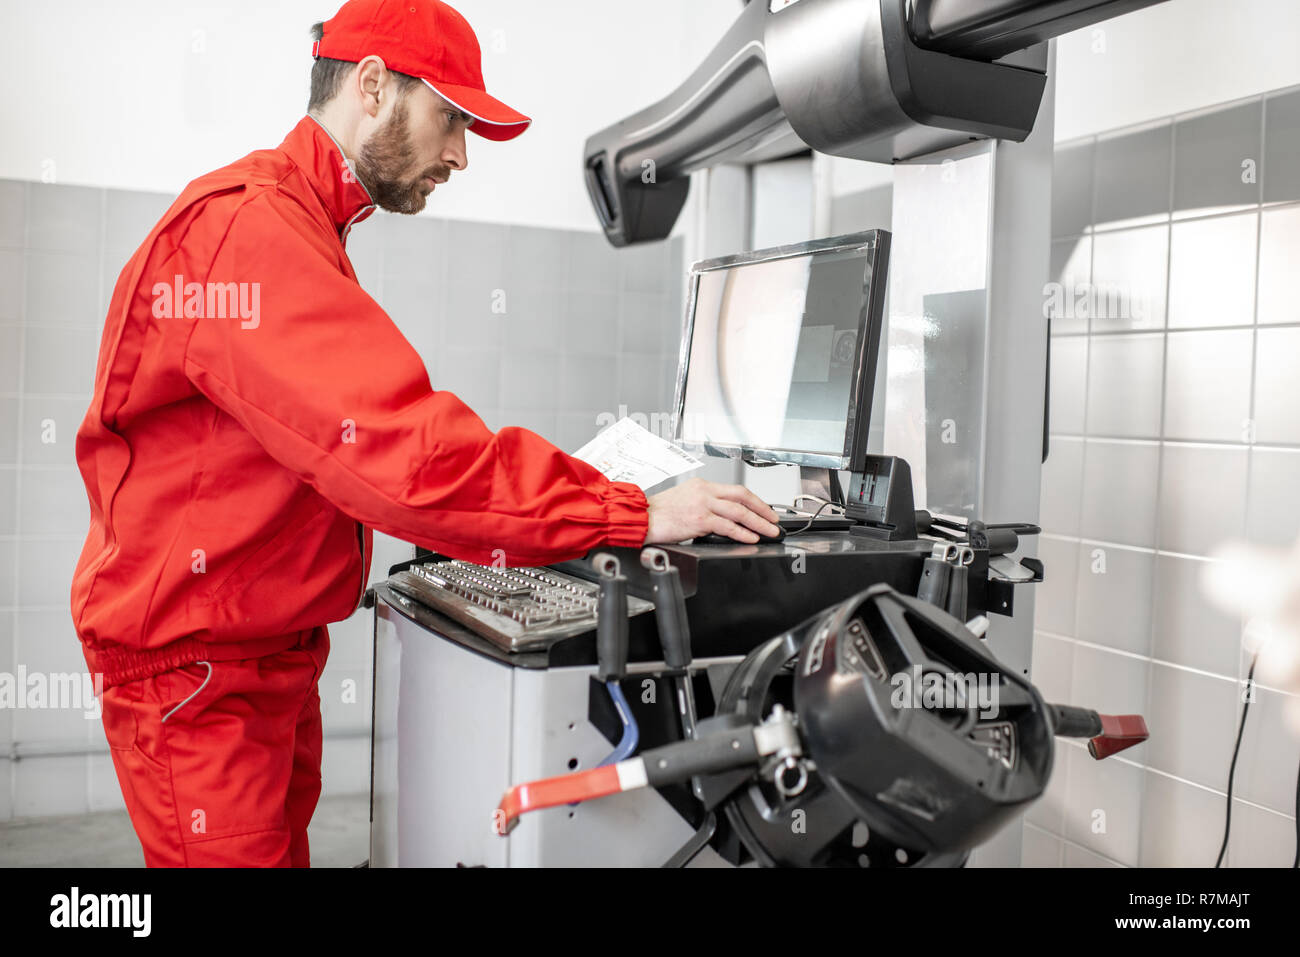 Auto mechanic in red uniform working with computer doing wheel allignment at the car service Stock Photo